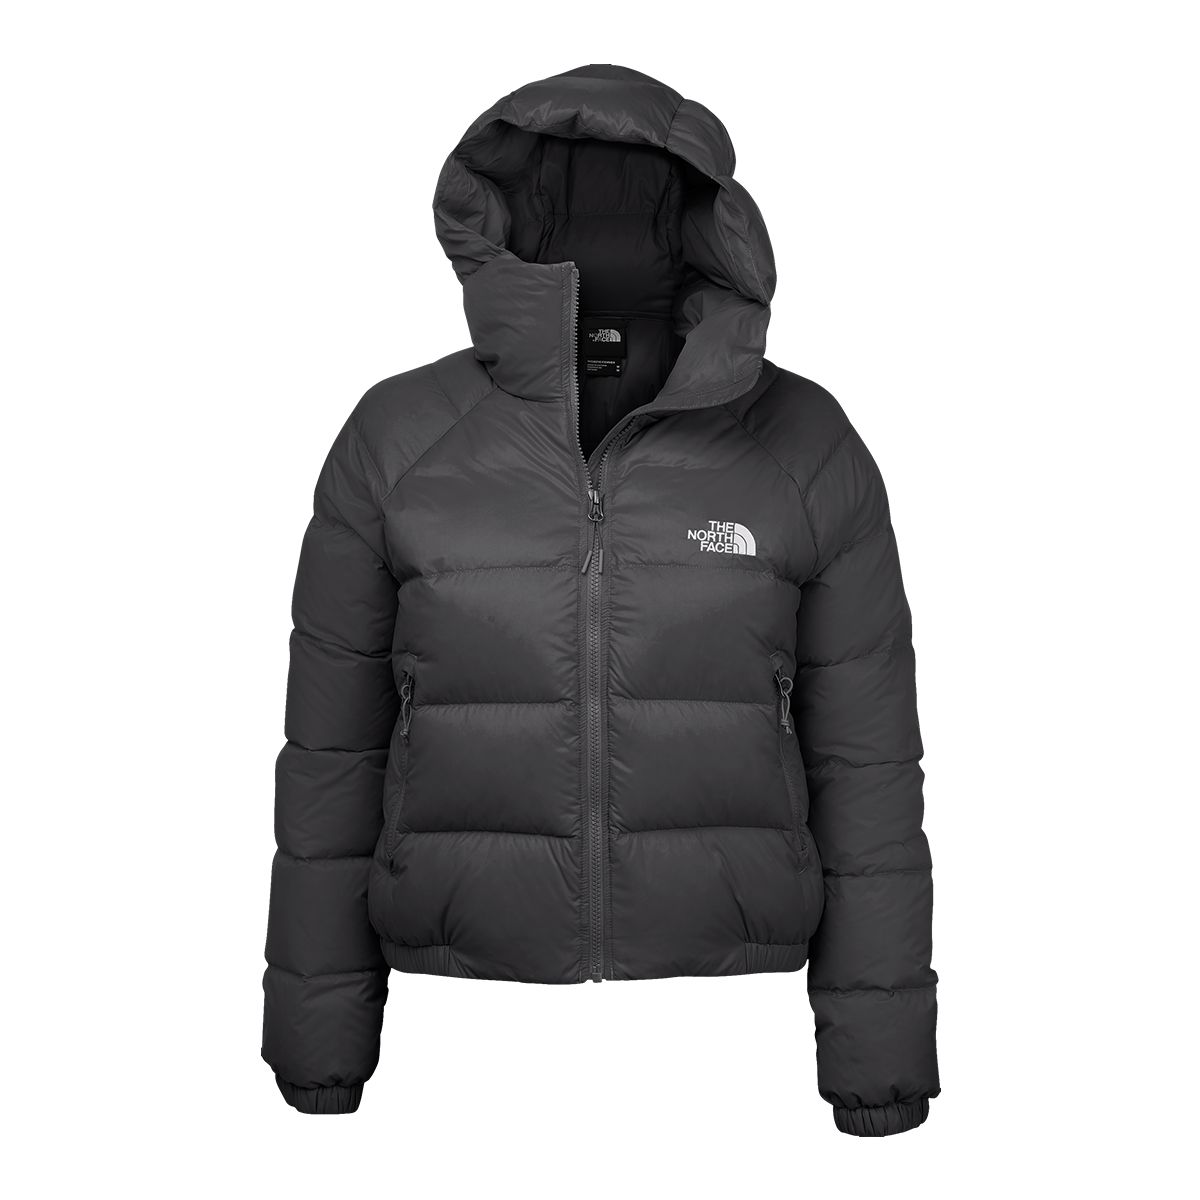 The North Face® Canada   Outdoor Clothing & Gear